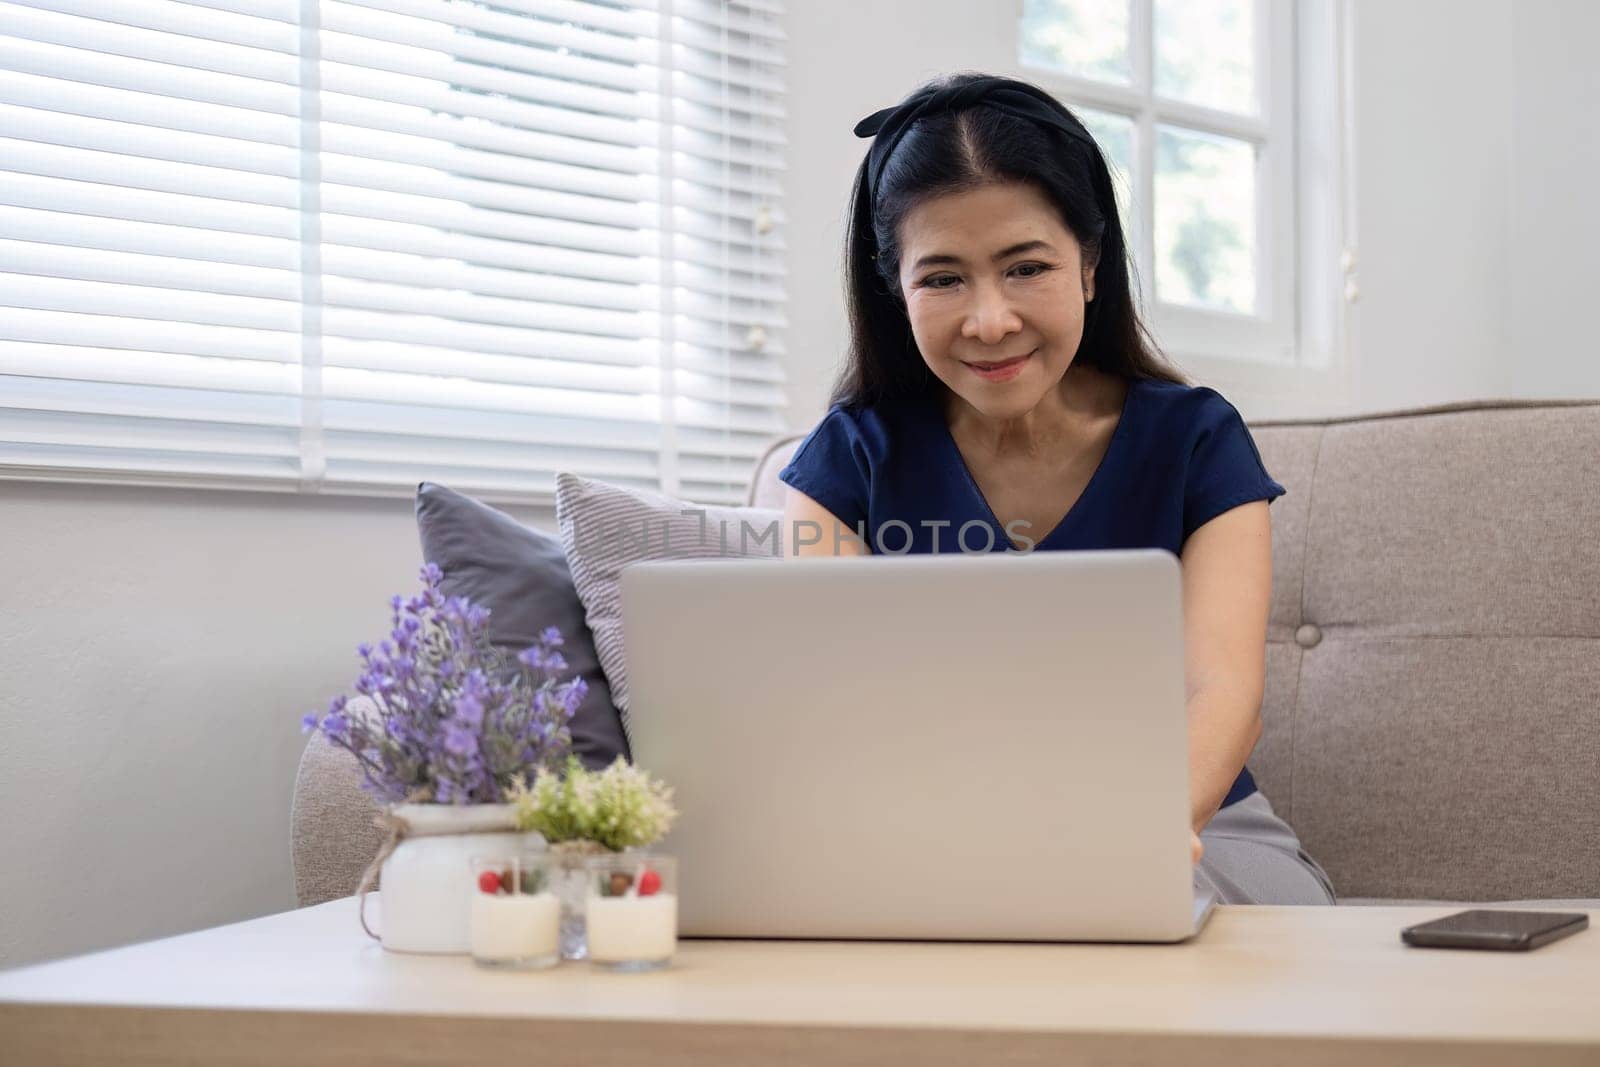 Happy elderly Asian woman in her 60s enjoys using social media on her laptop while relaxing in the living room..